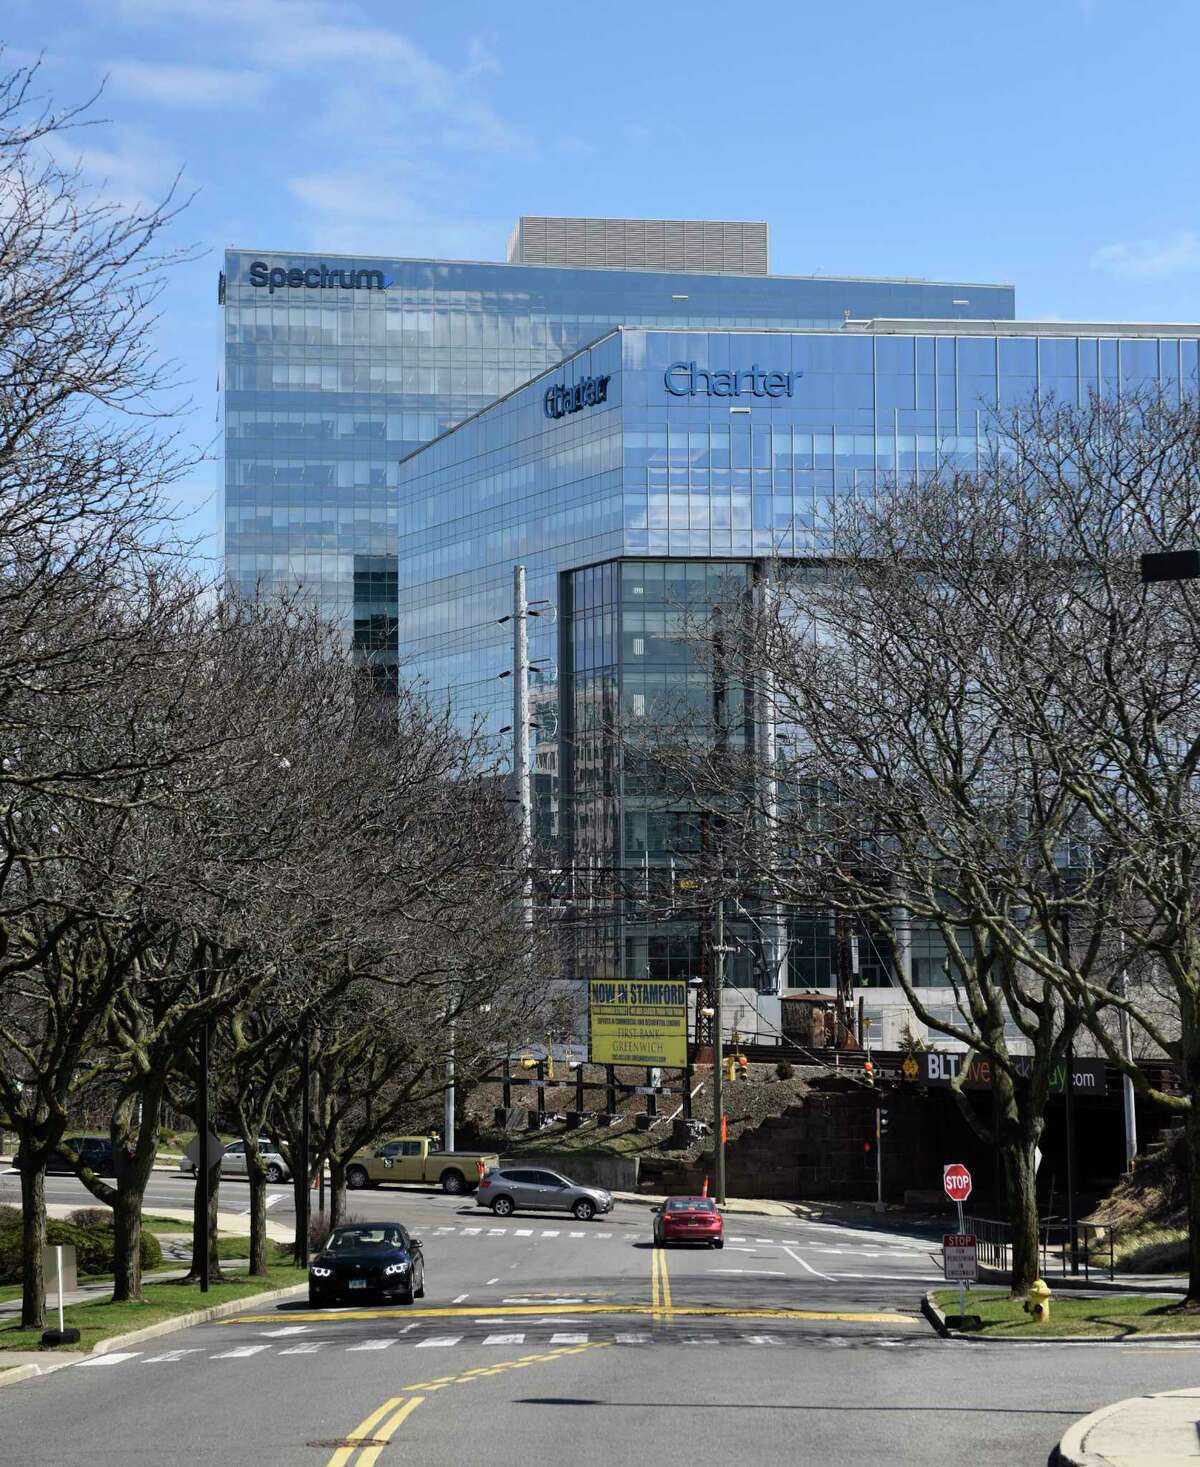 Charter Communications, the provider of Spectrum-branded services, is headquartered at 400 Washington Blvd., next to the downtown Metro-North Railroad station in Stamford, Conn.